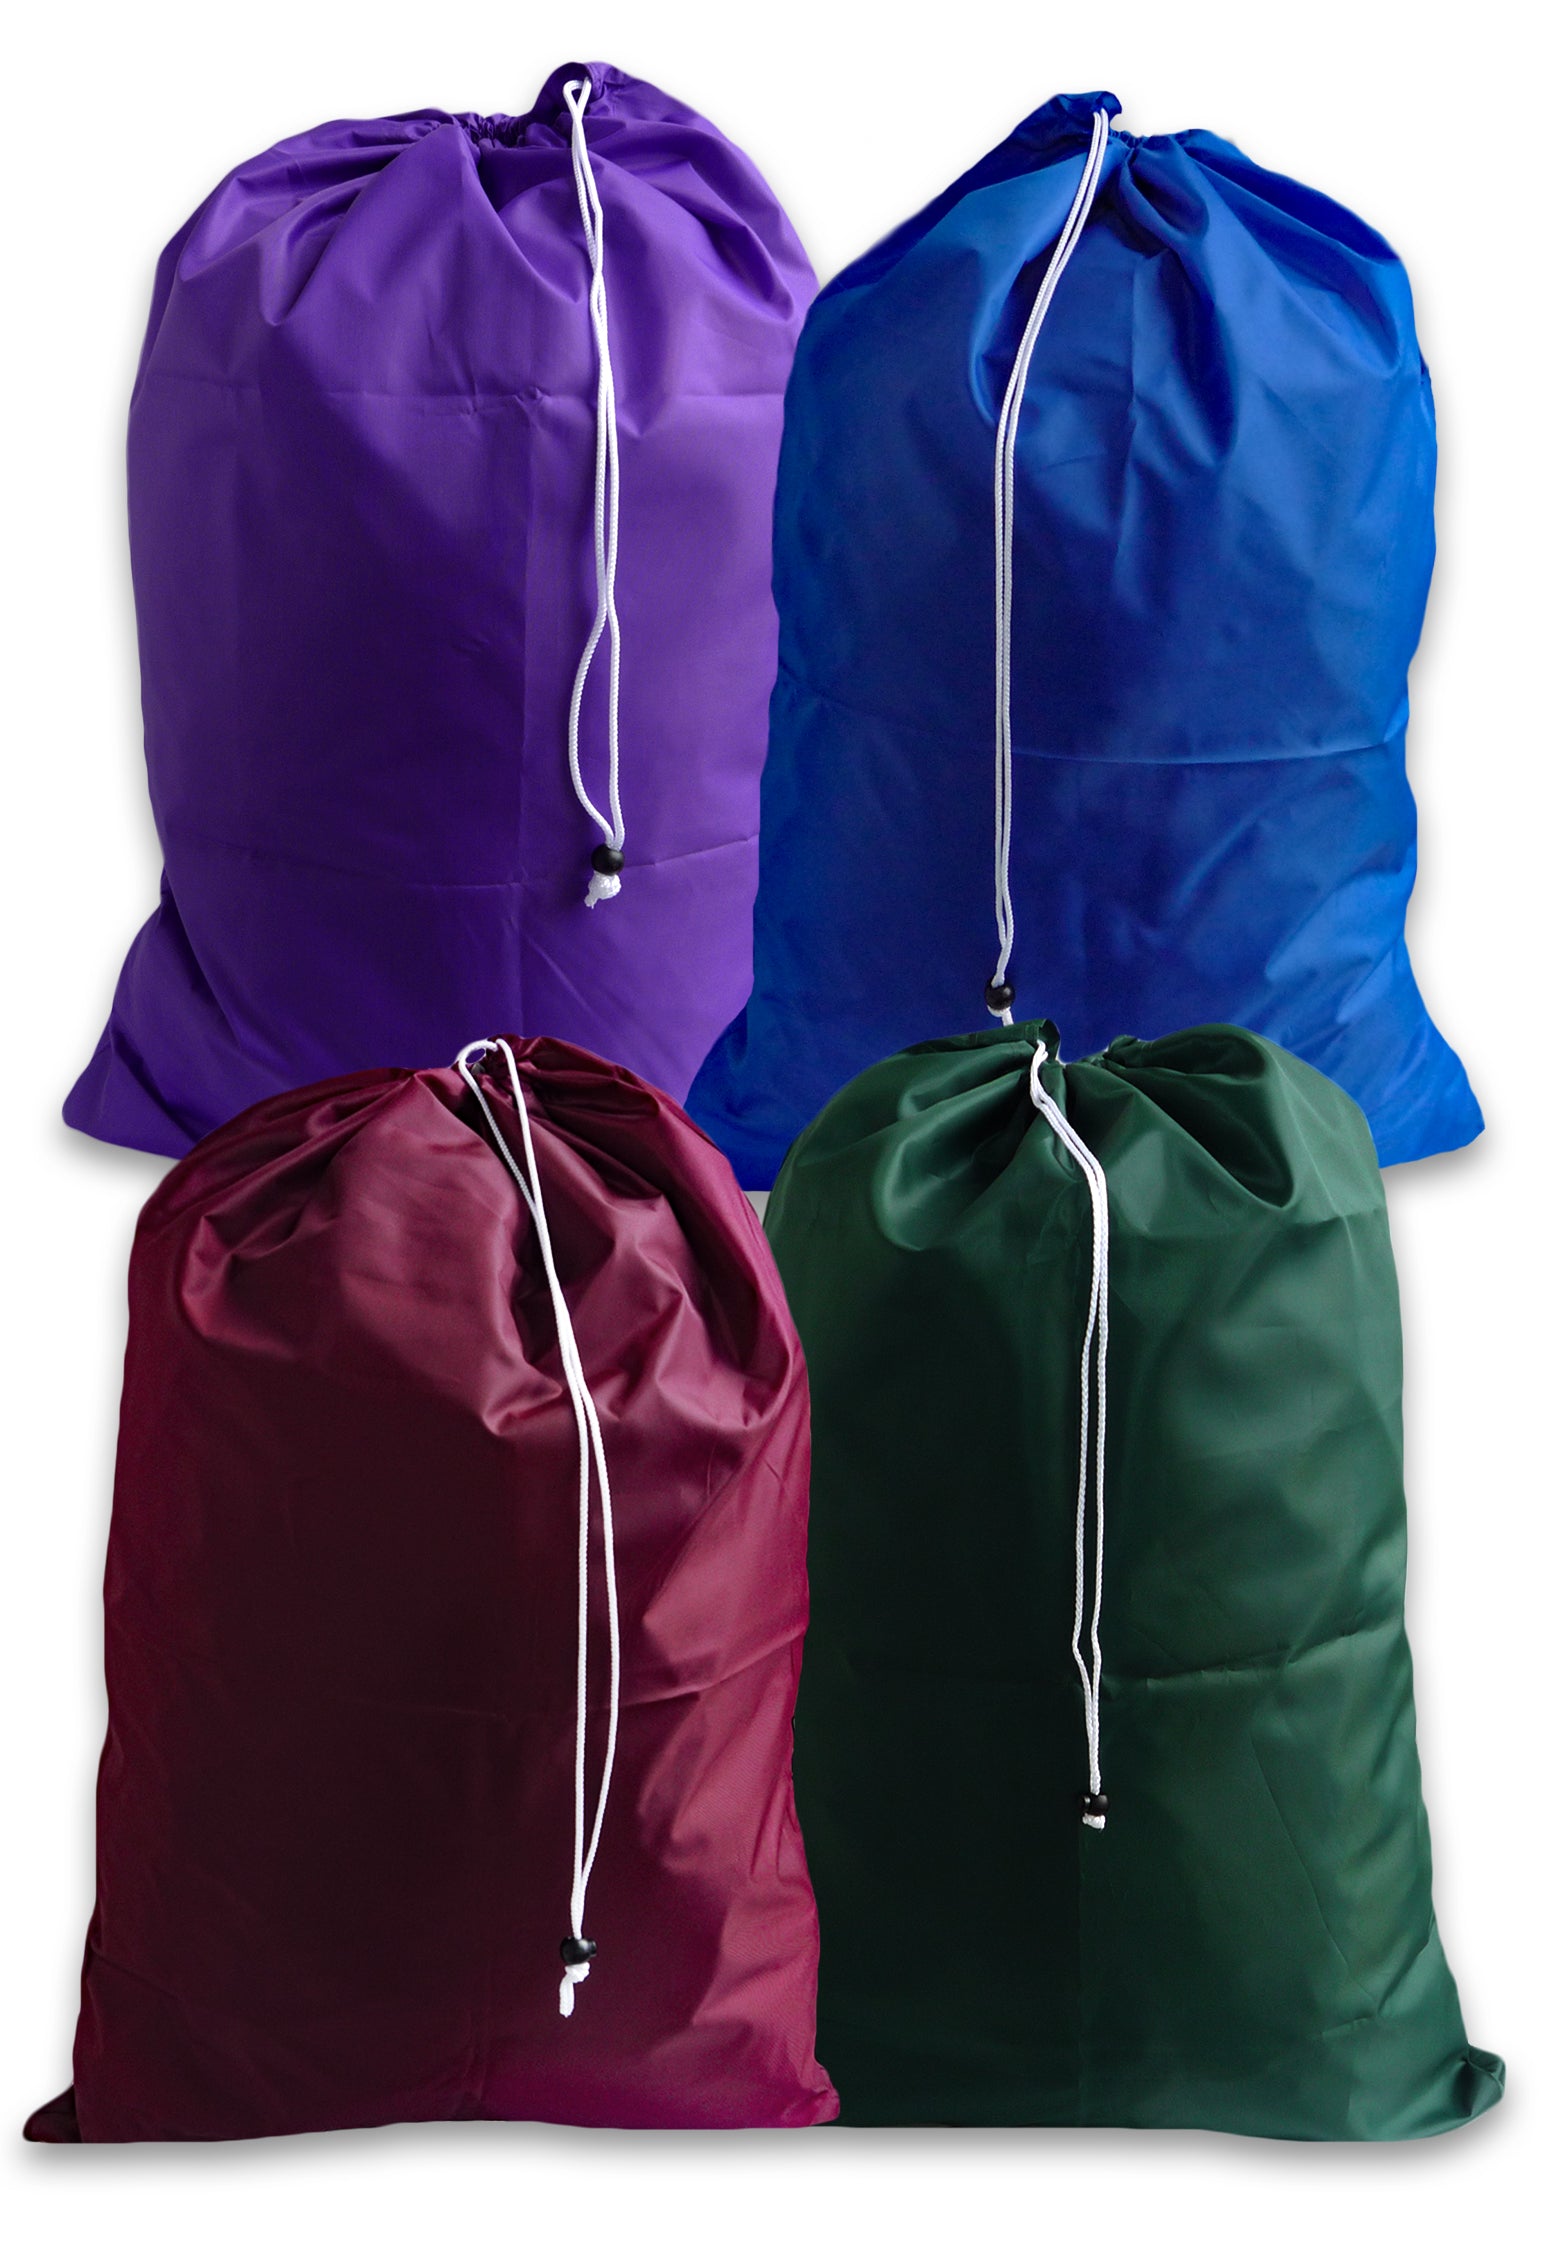 Medium Drawstring Laundry Bags, Assorted Color 5 Pack